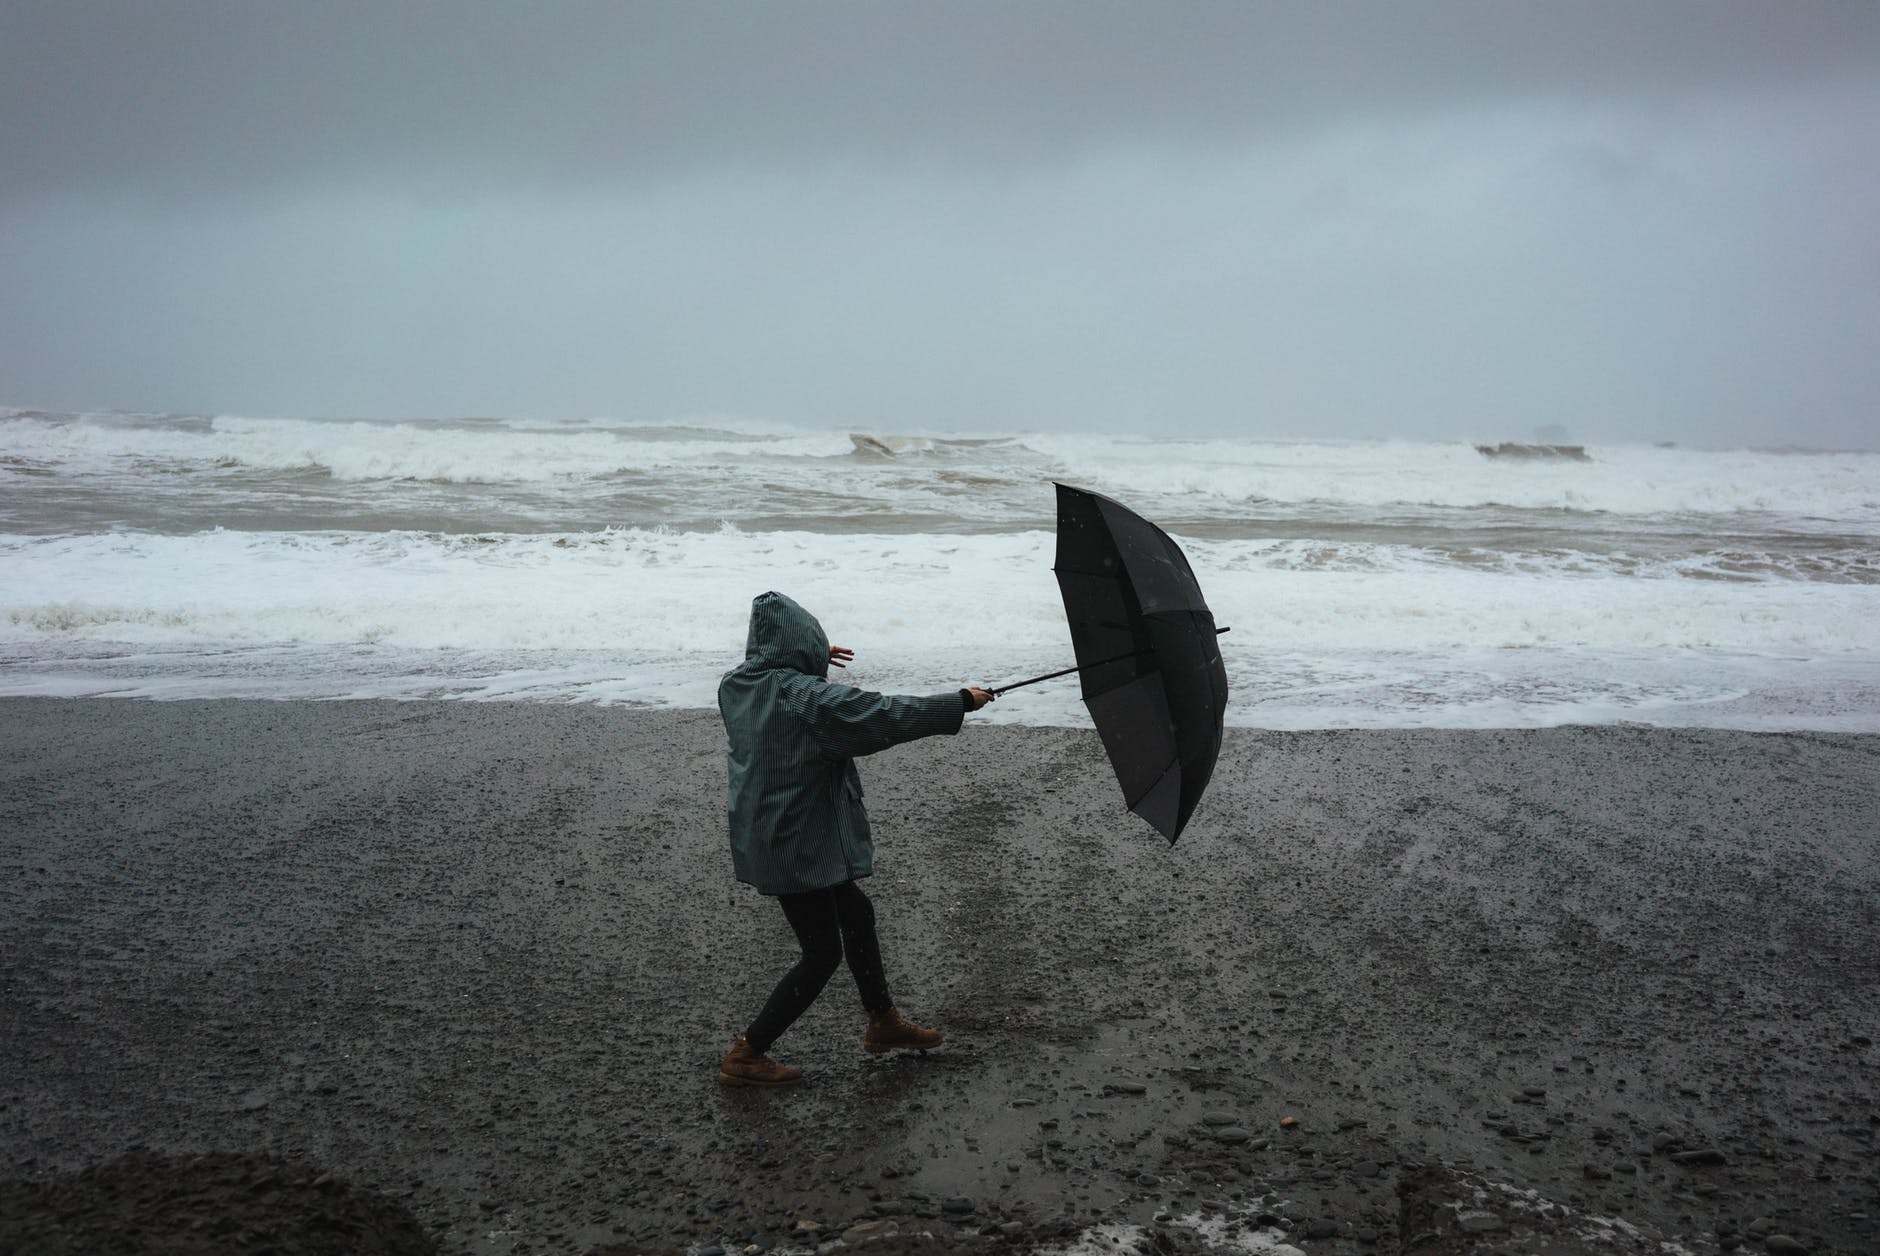 Person with an umbrella on the beach in a storm.